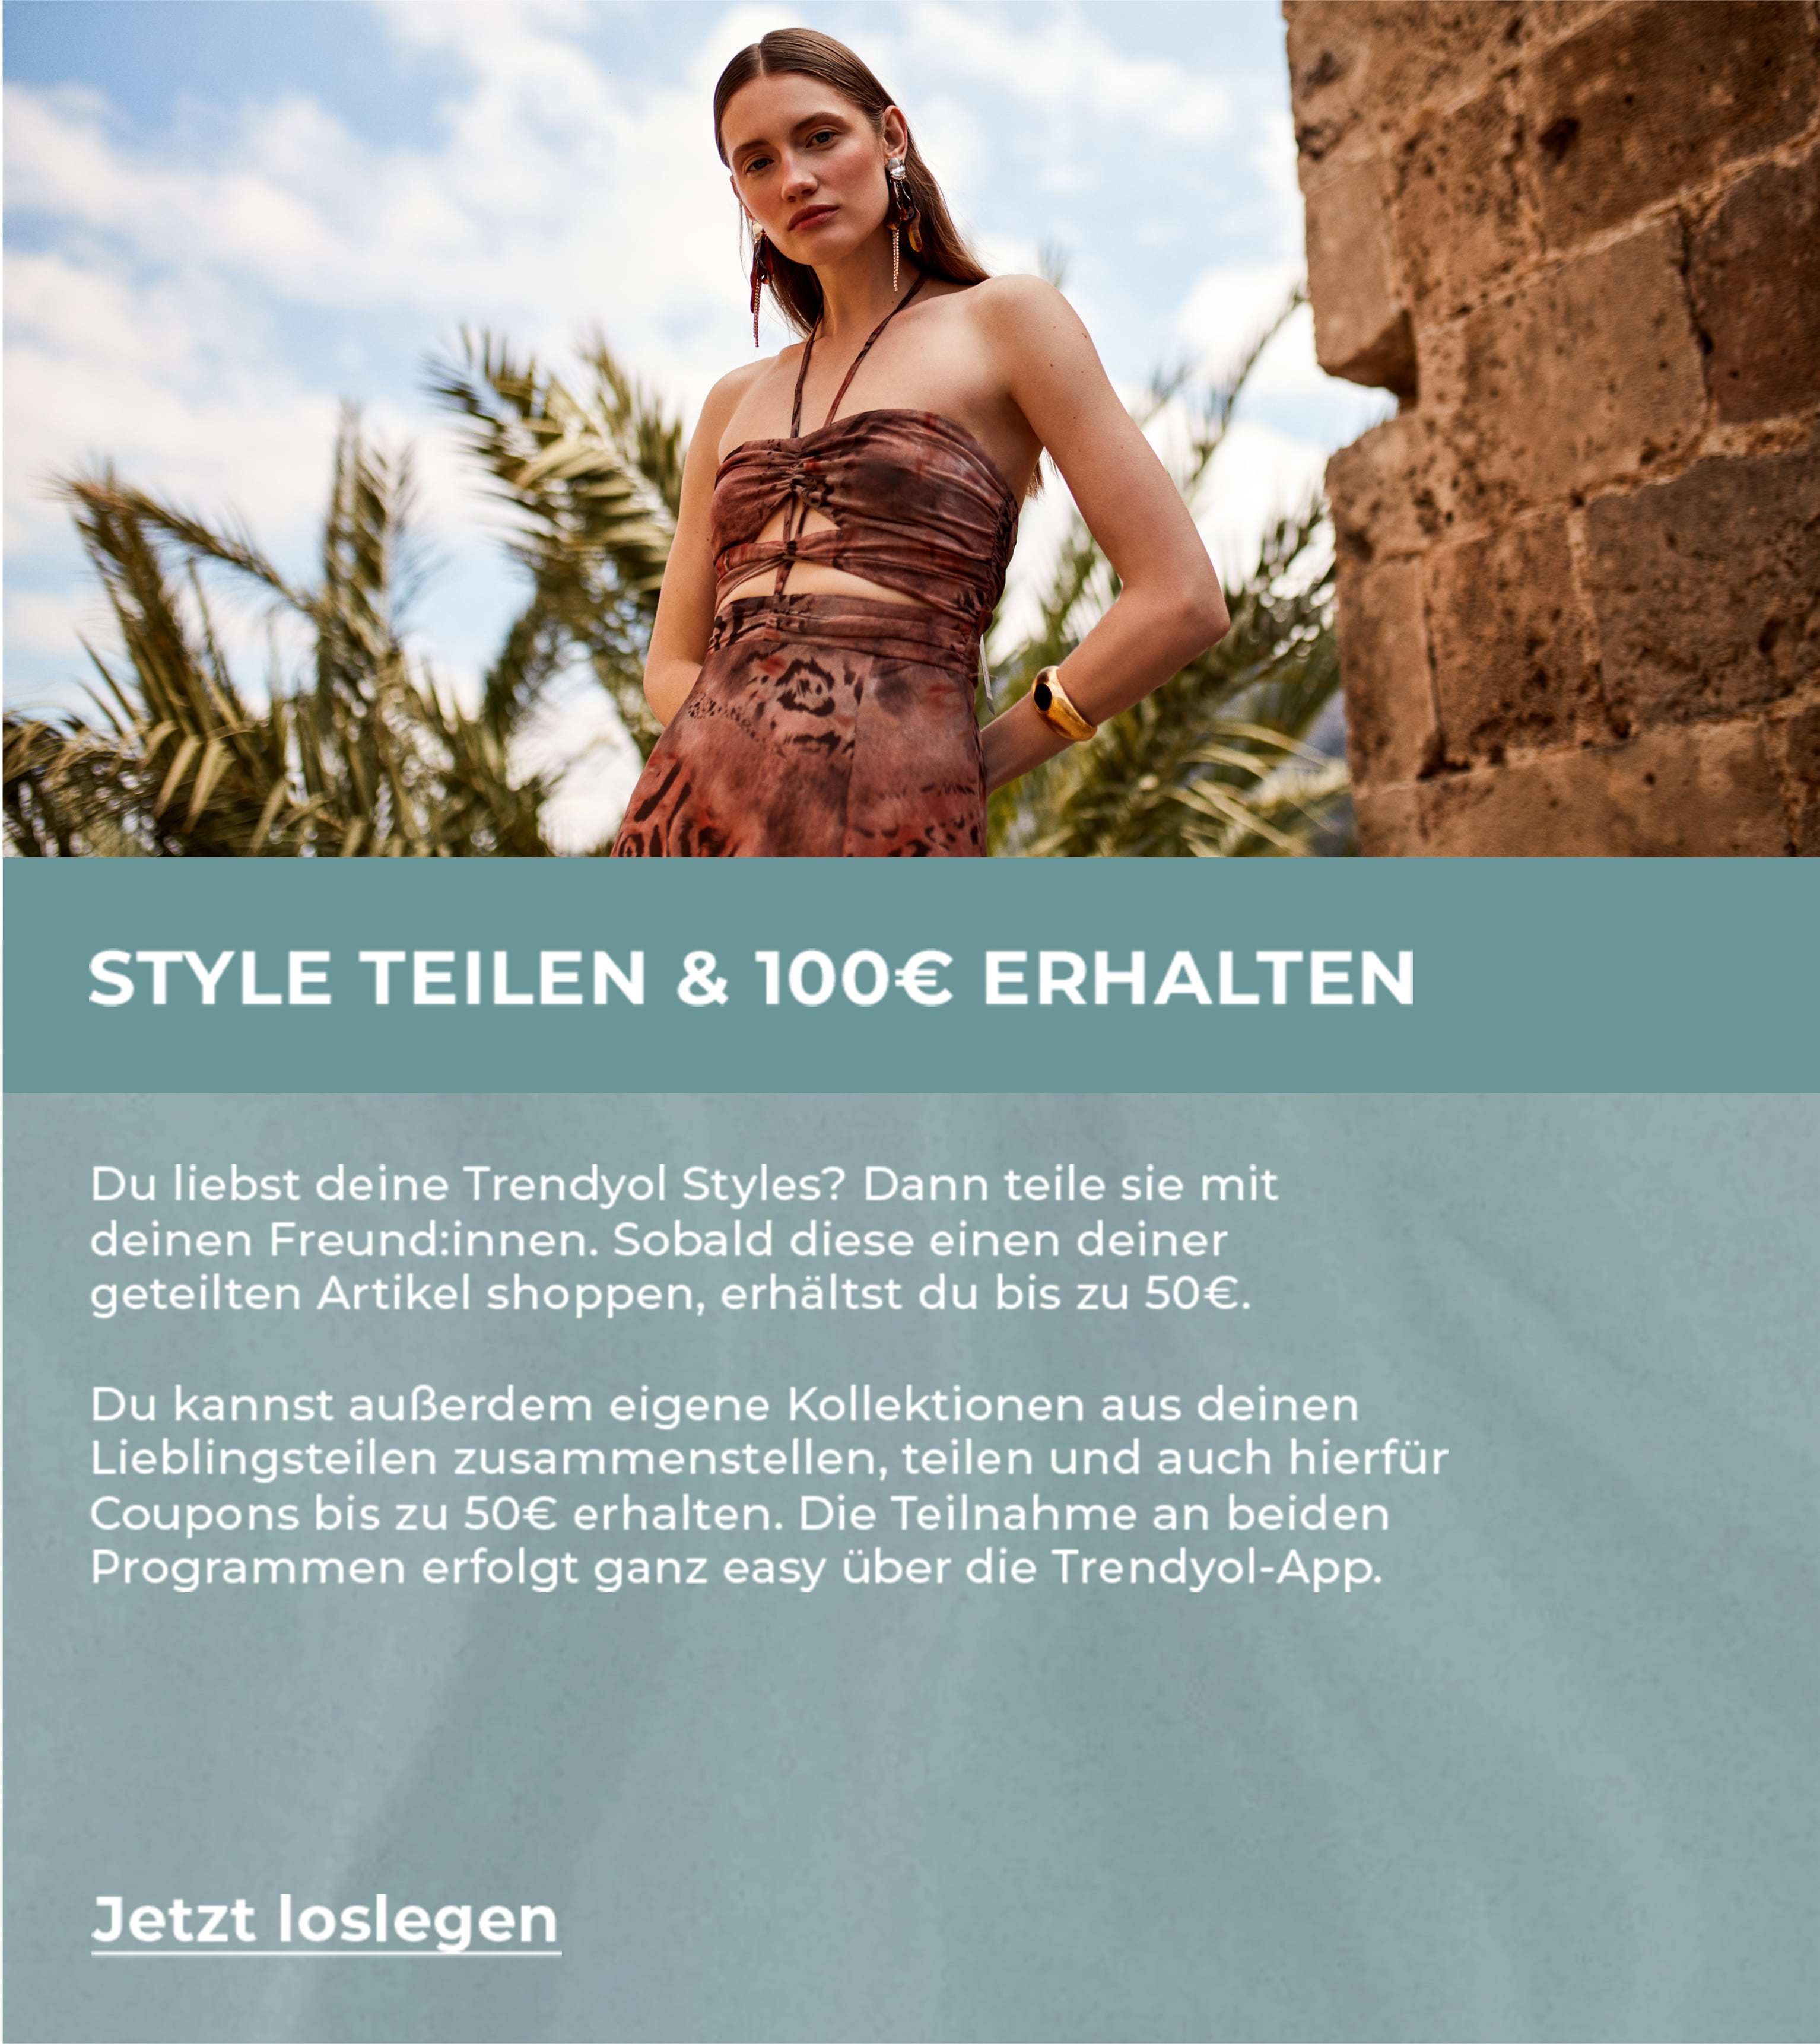 Share your style & earn €100